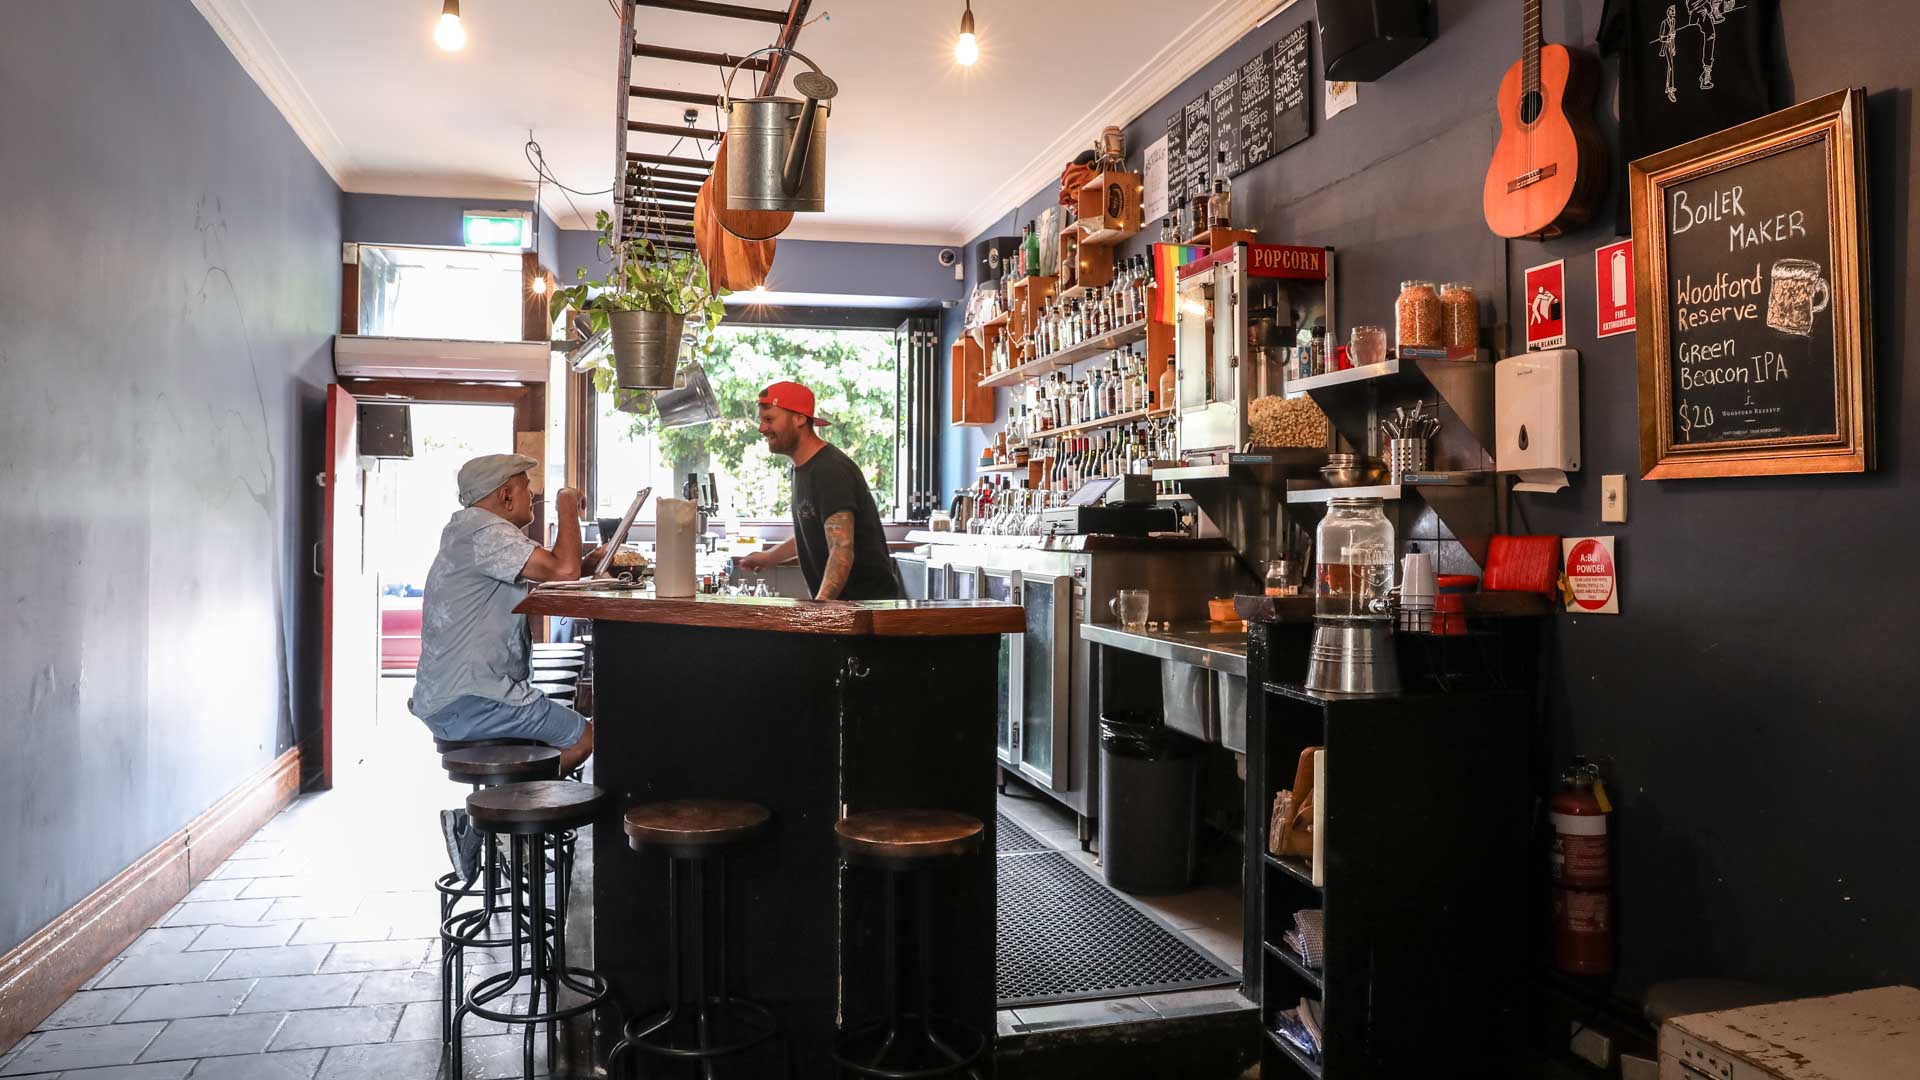 Our Sydney: Here Are Our Readers' Favourite Spots to Visit in Glebe, Ultimo and Pyrmont